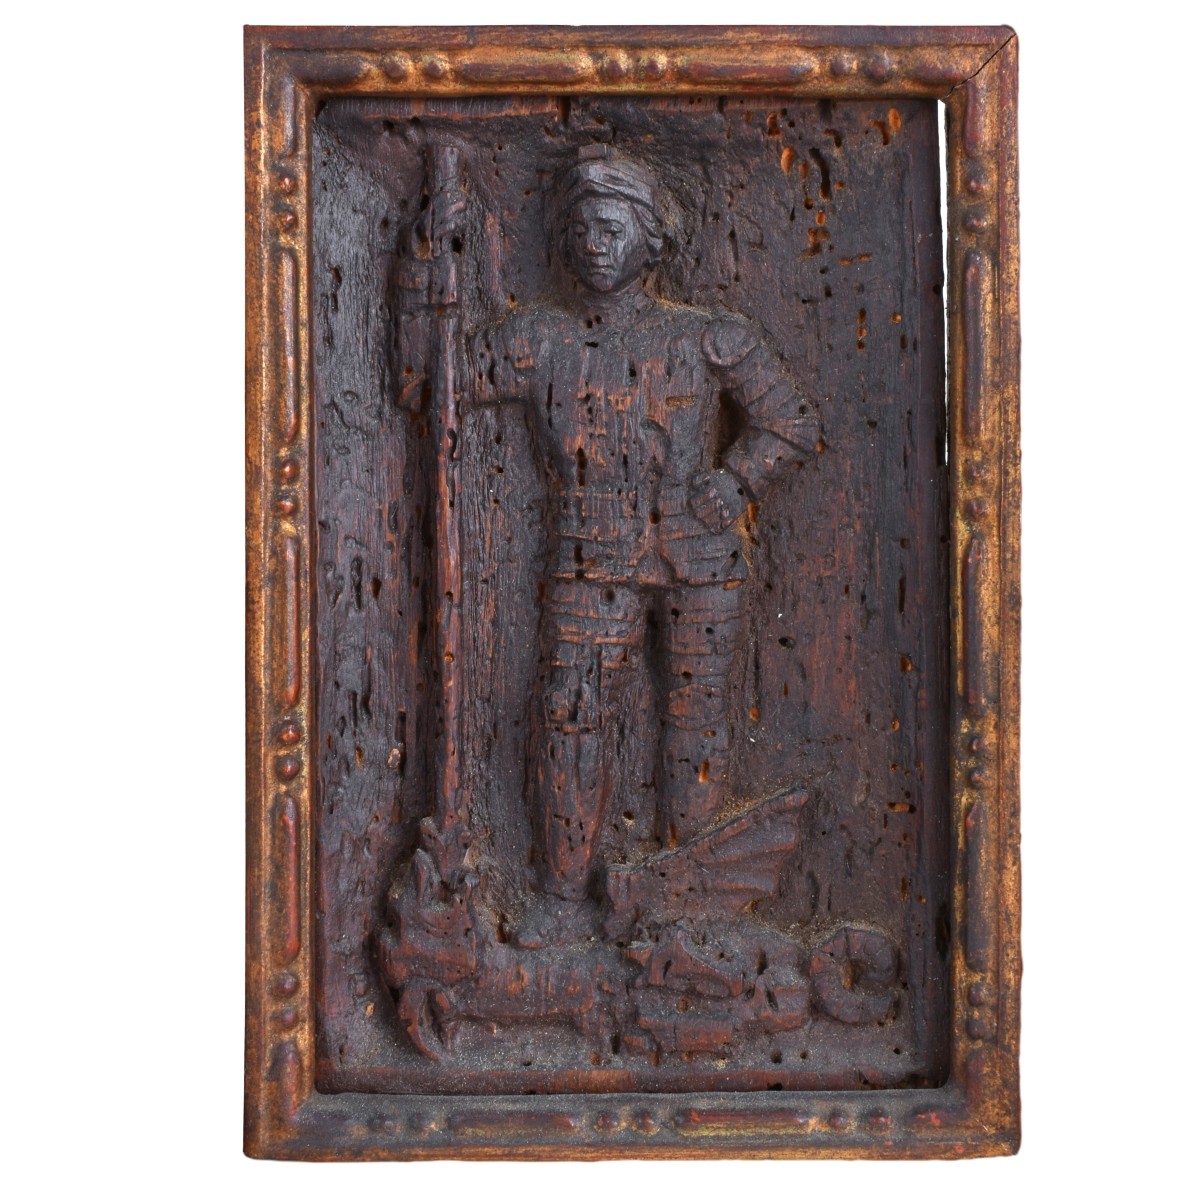 Antique Figural Relief Carving in Frame